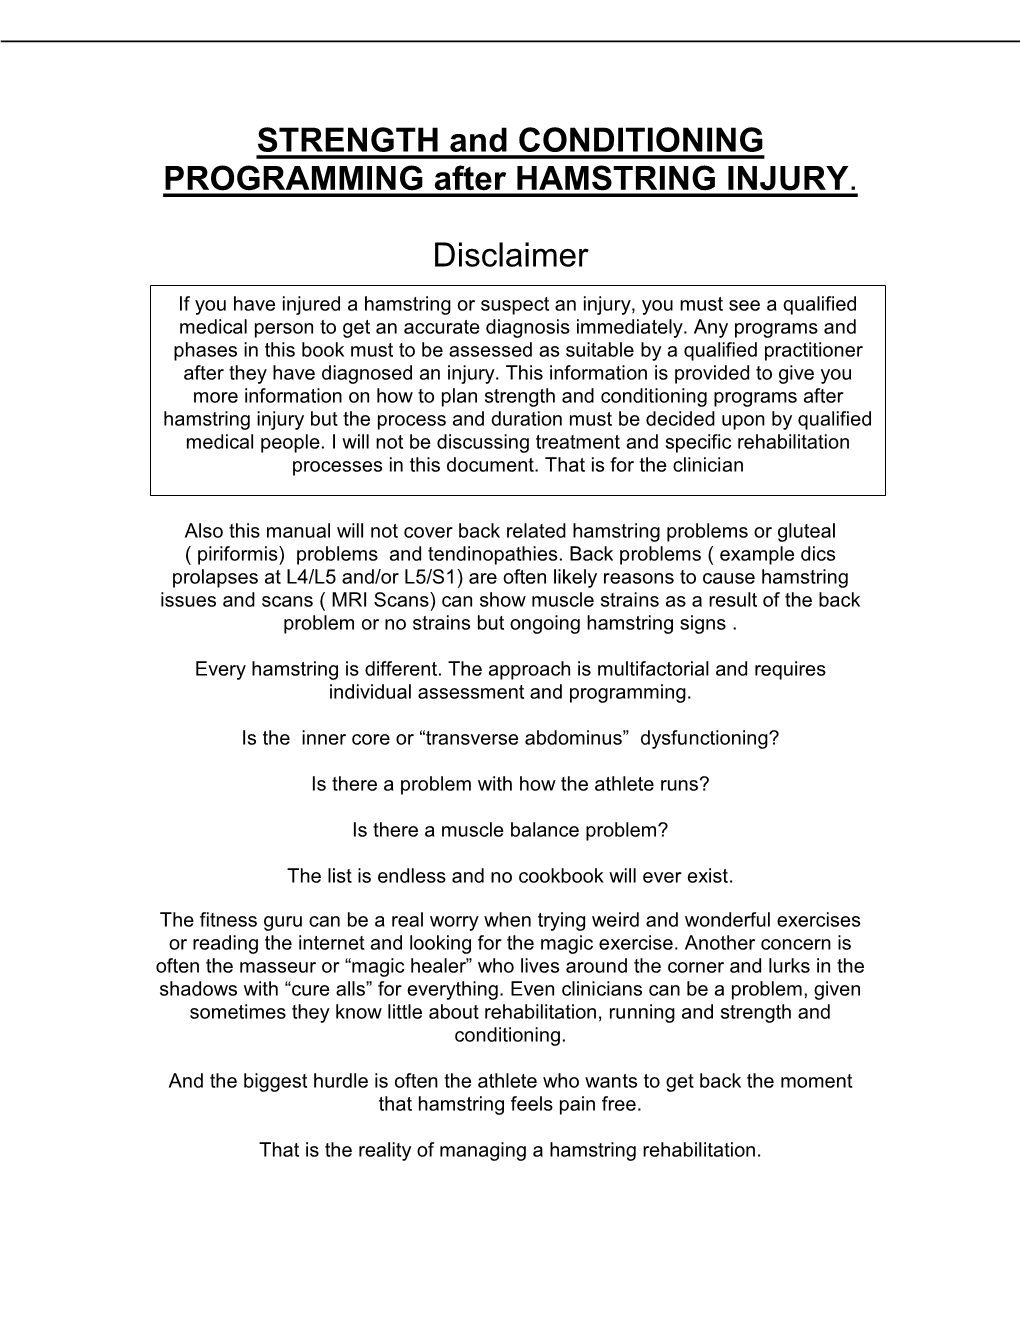 STRENGTH and CONDITIONING PROGRAMMING After HAMSTRING INJURY